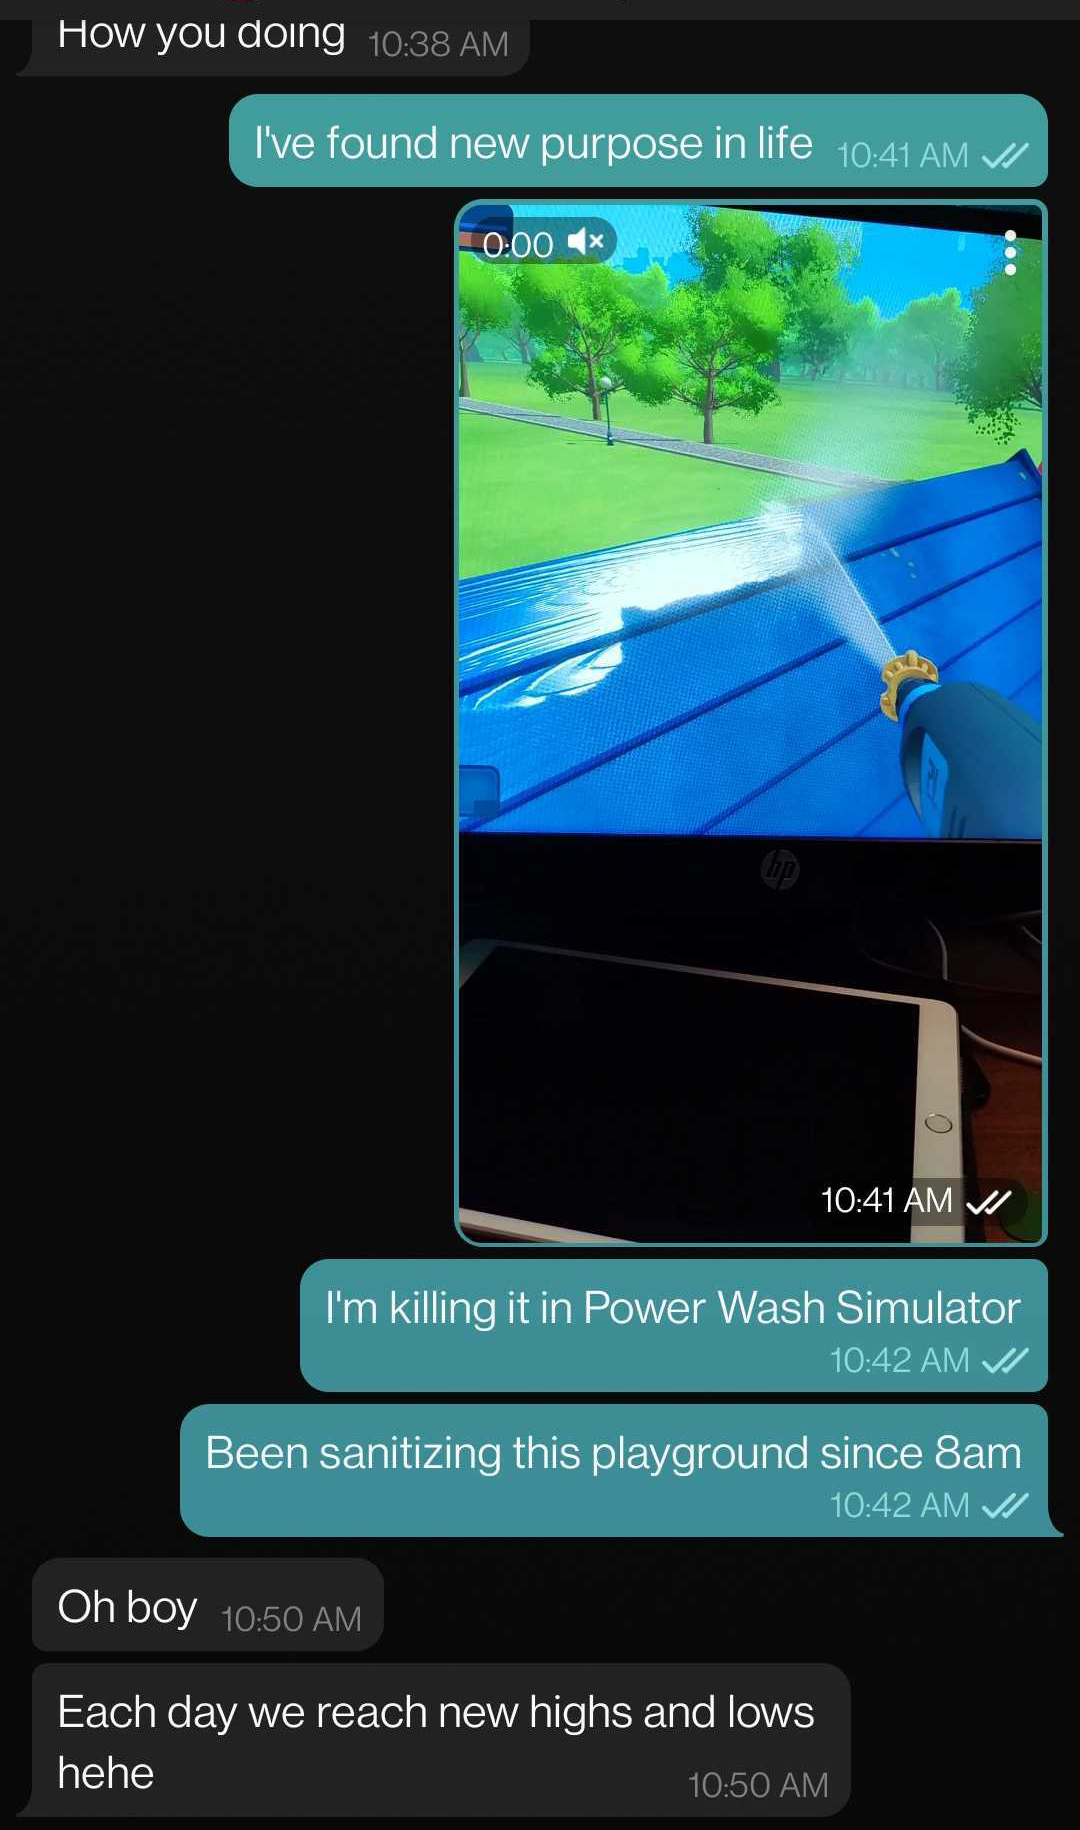 Not everyone will appreciate the joys of Power Wash Simulator, and that's okay